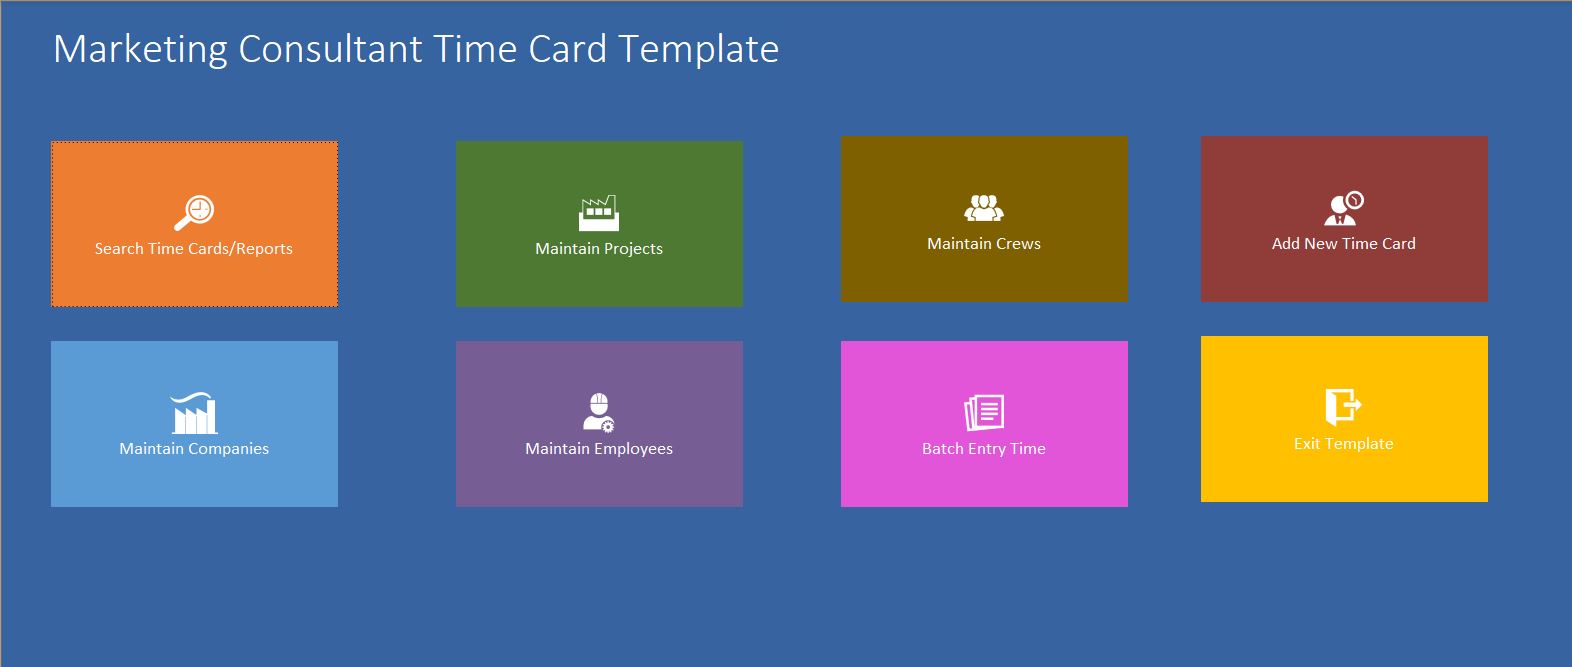 Marketing Consultant Time Card Template | Time Card Database